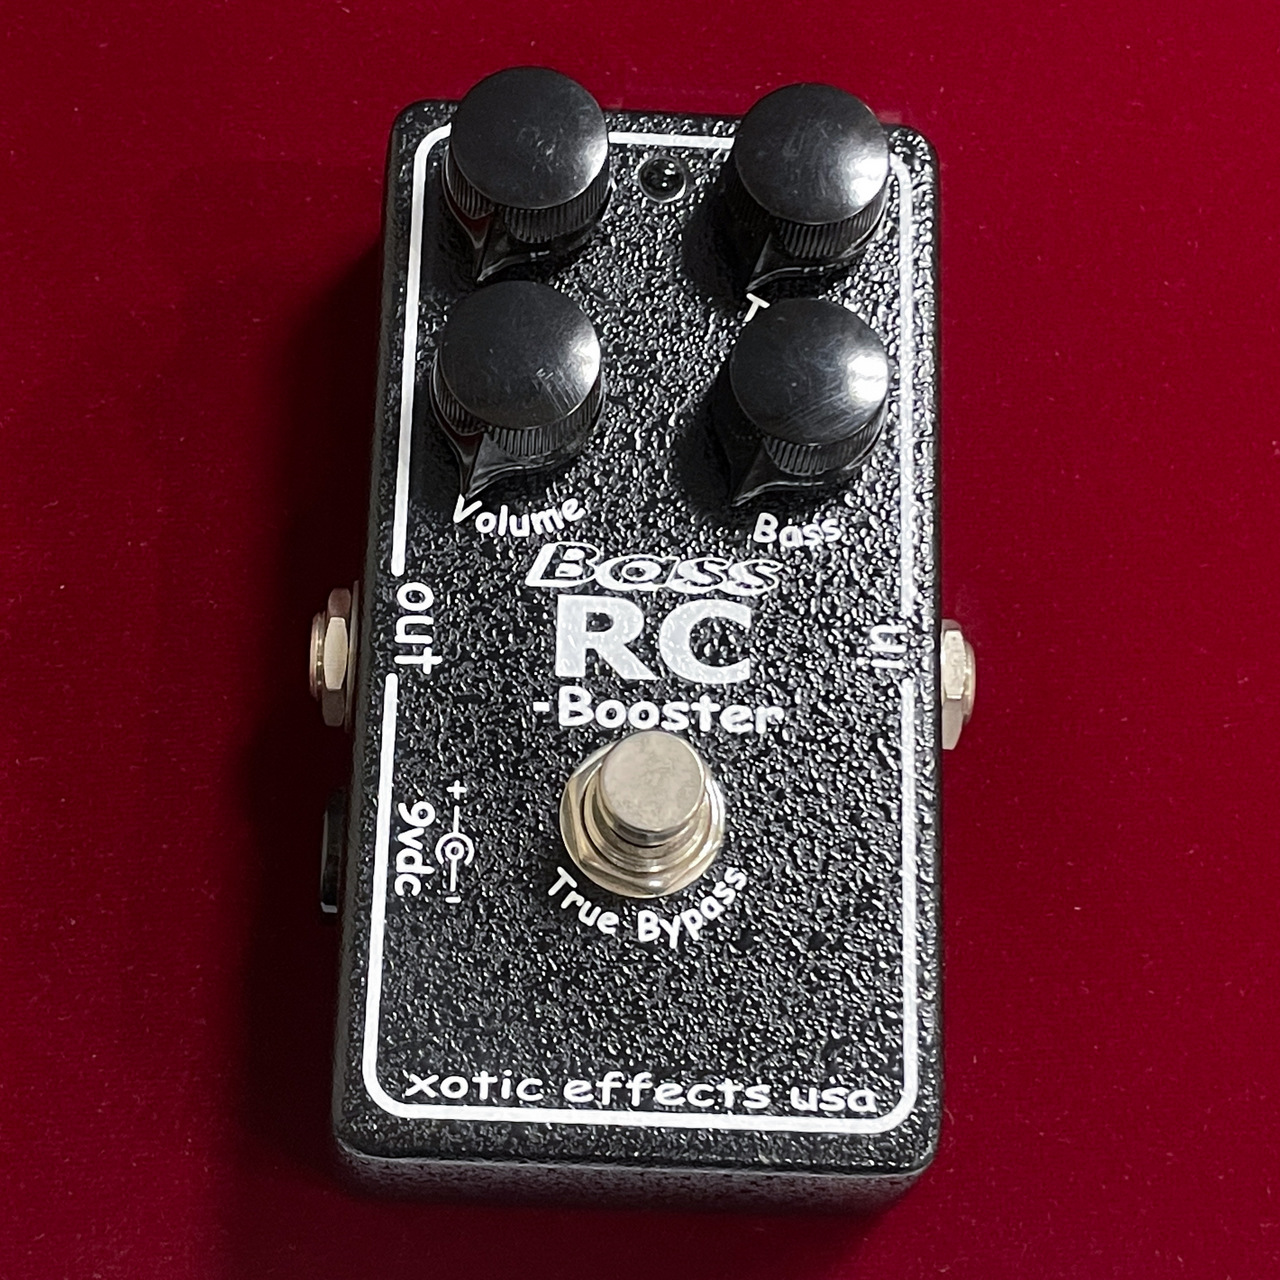 xotic bass rc booster